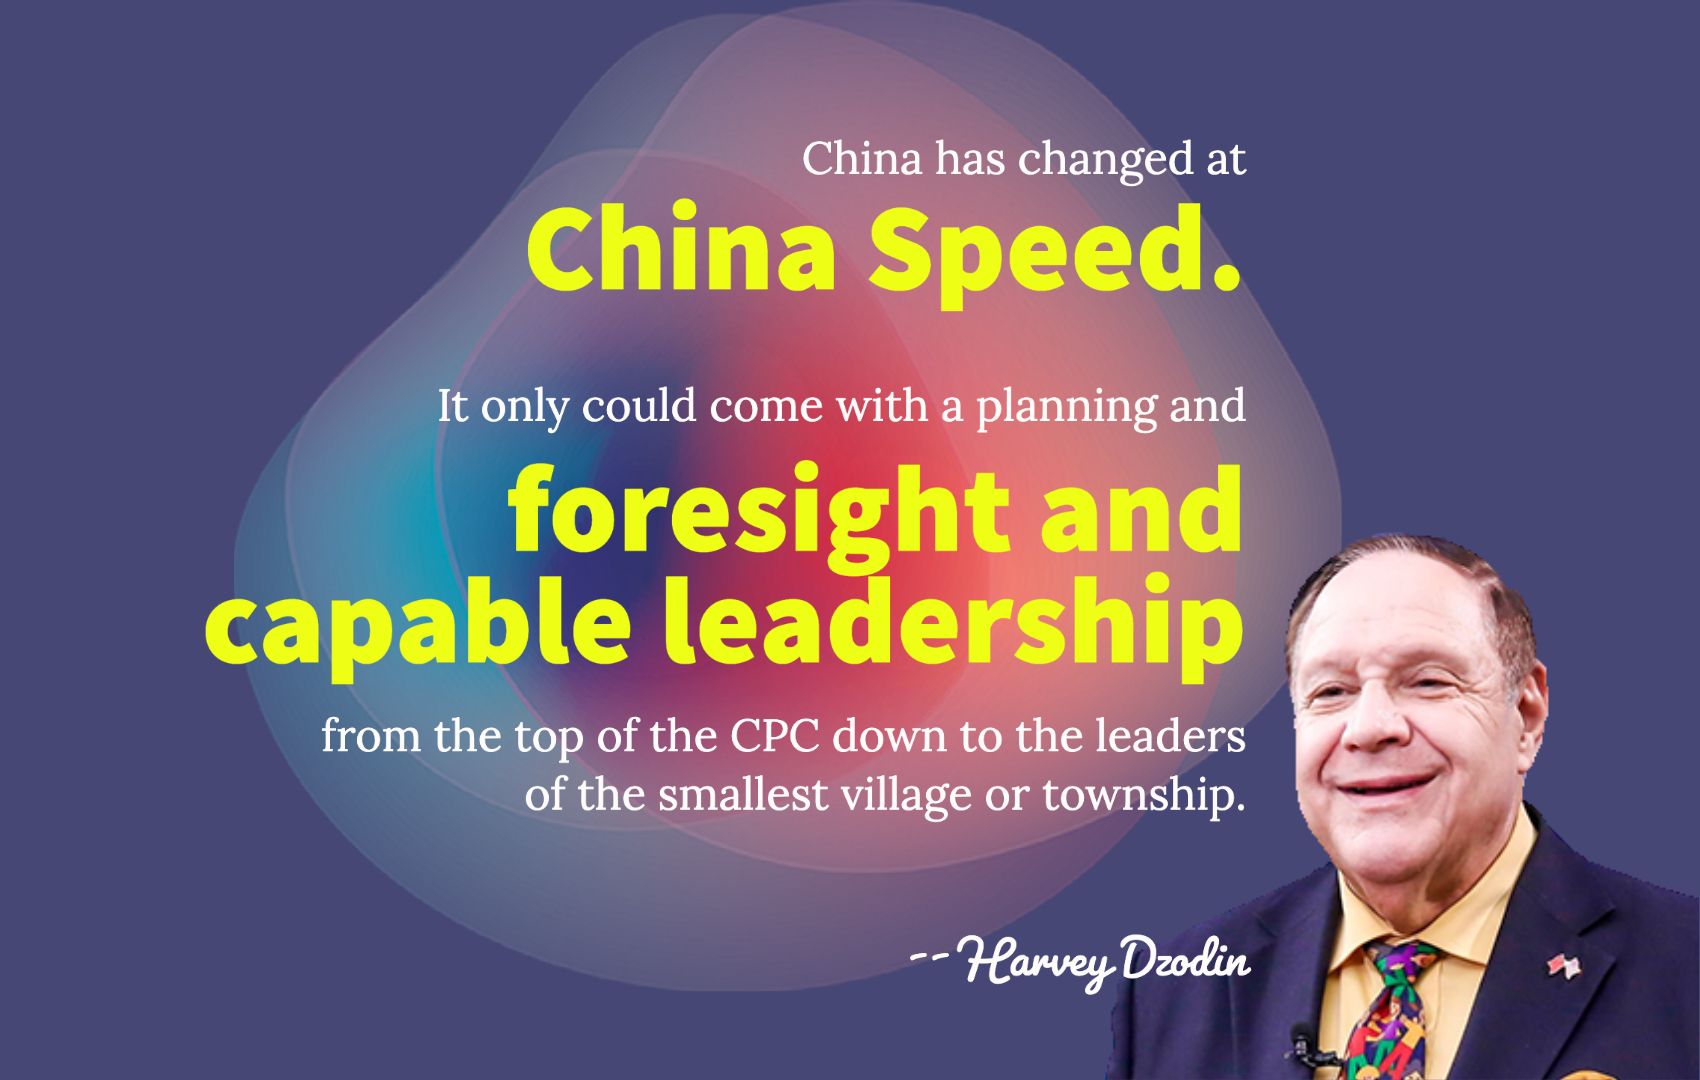 Harvey Dzodin: Foresight and capable leadership of CPC ensure China Speed